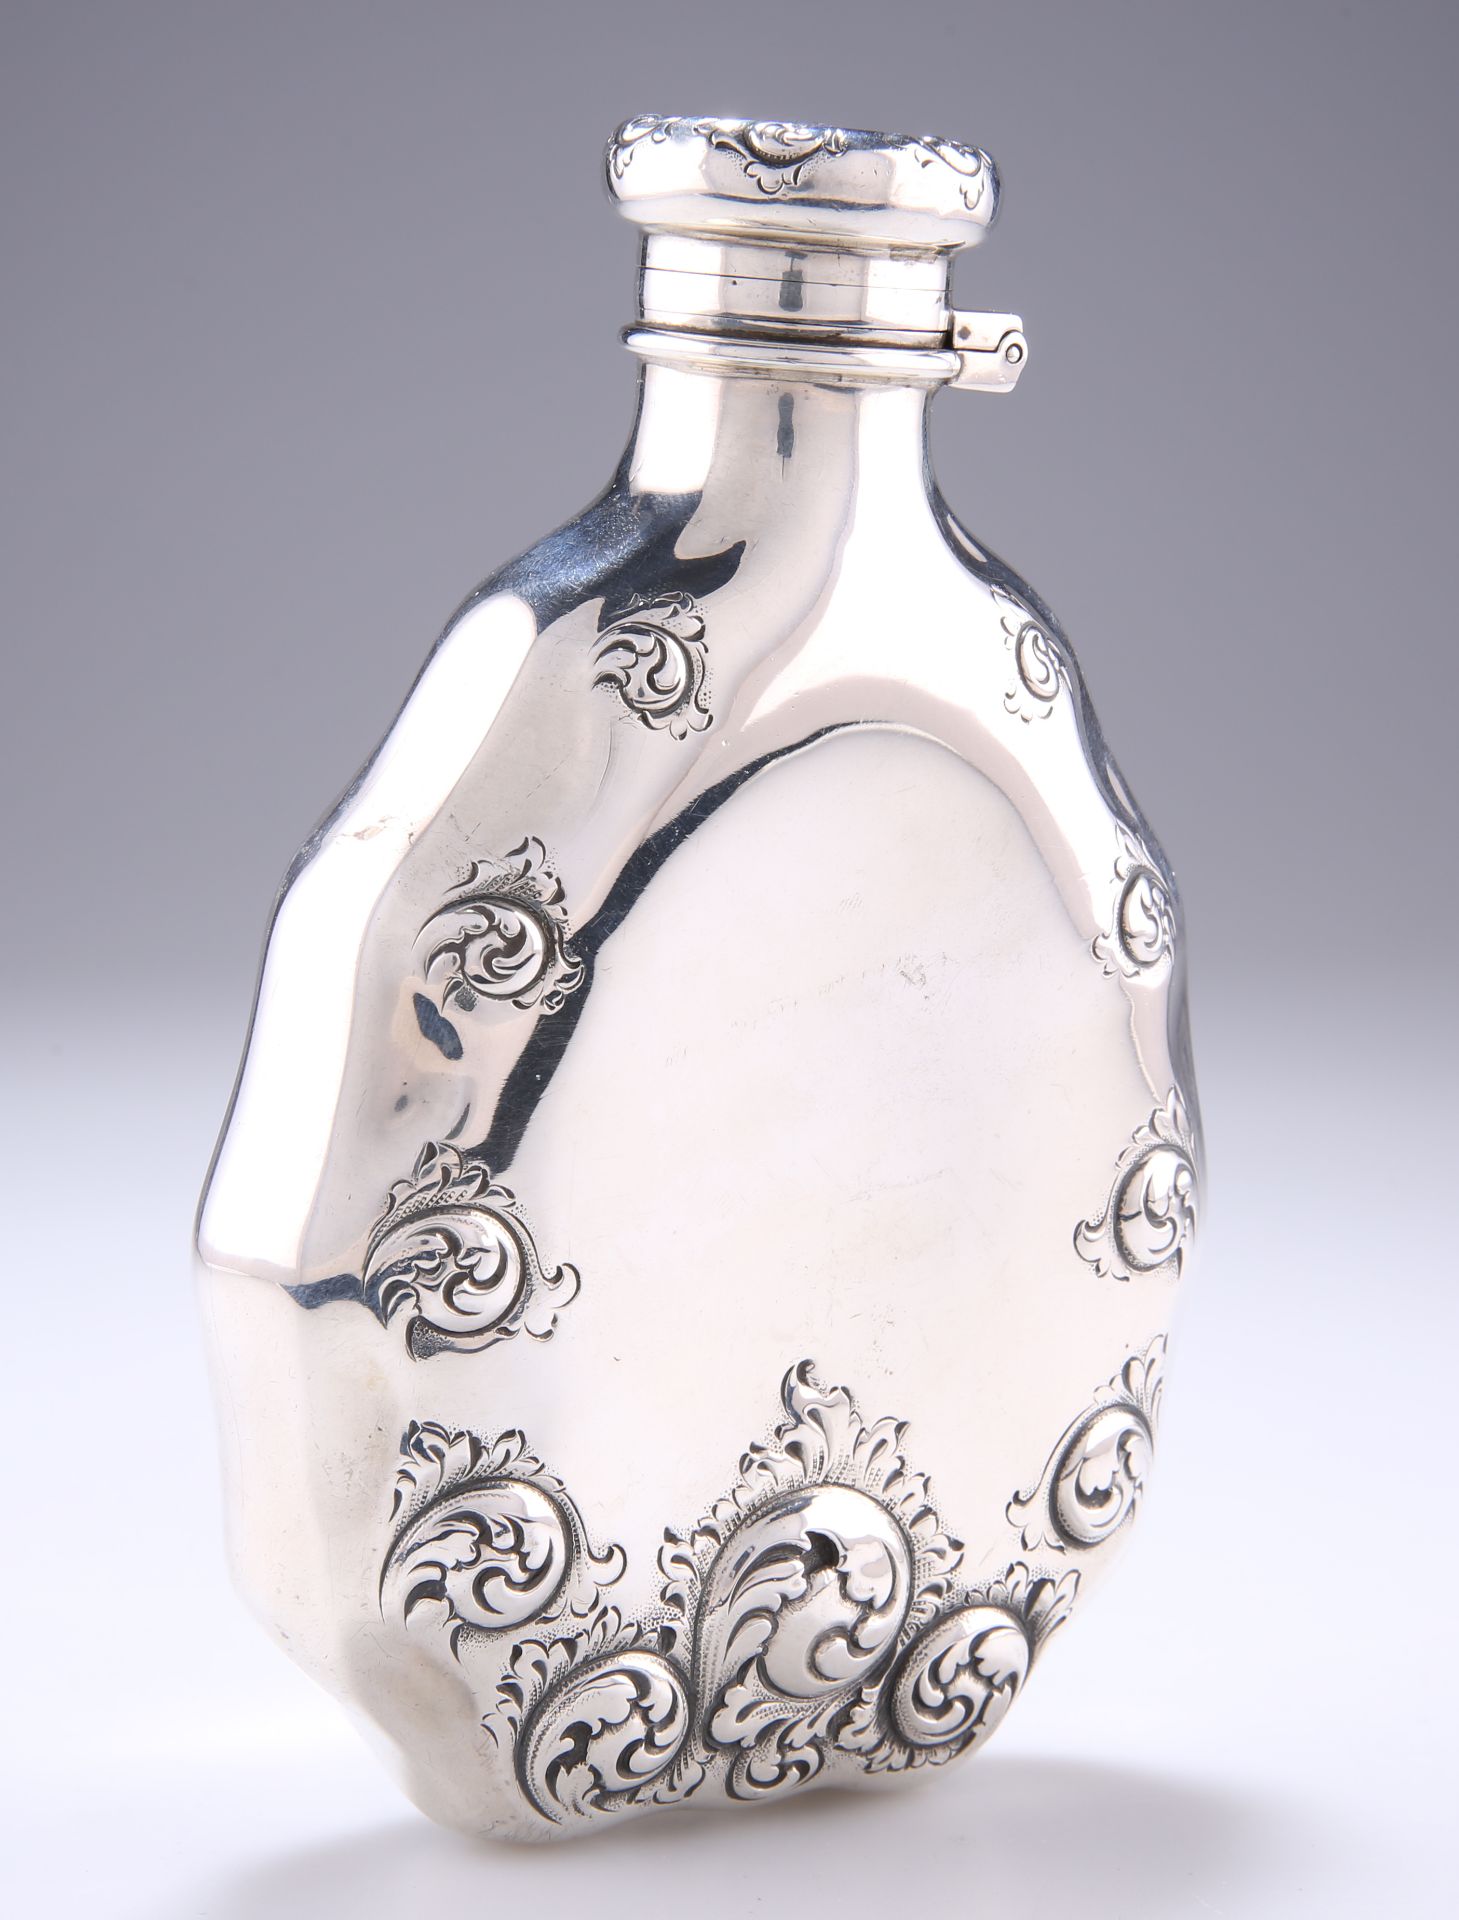 TIFFANY & CO., AN AMERICAN STERLING SILVER FLASK - Image 2 of 3